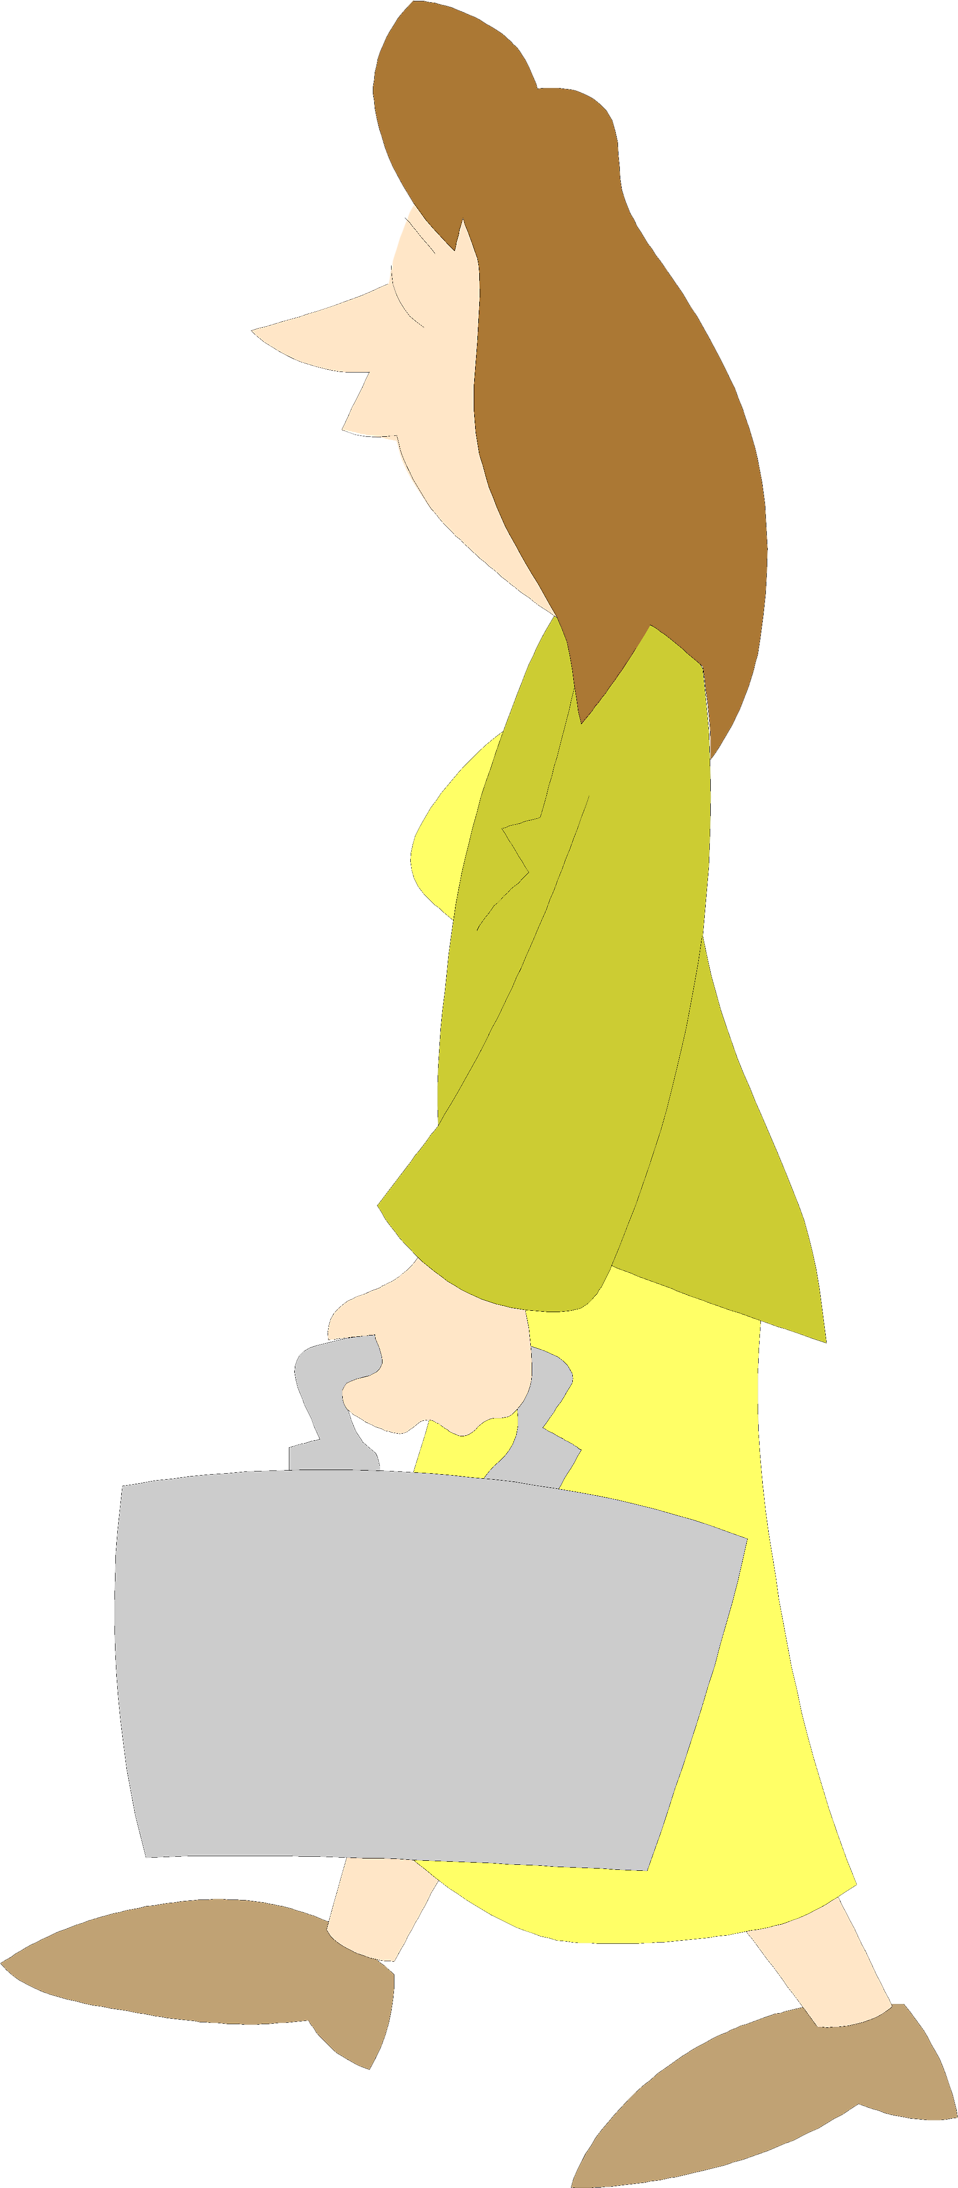 Illustration Of A Business Woman Carrying A Briefcase - Illustration (958x2188)